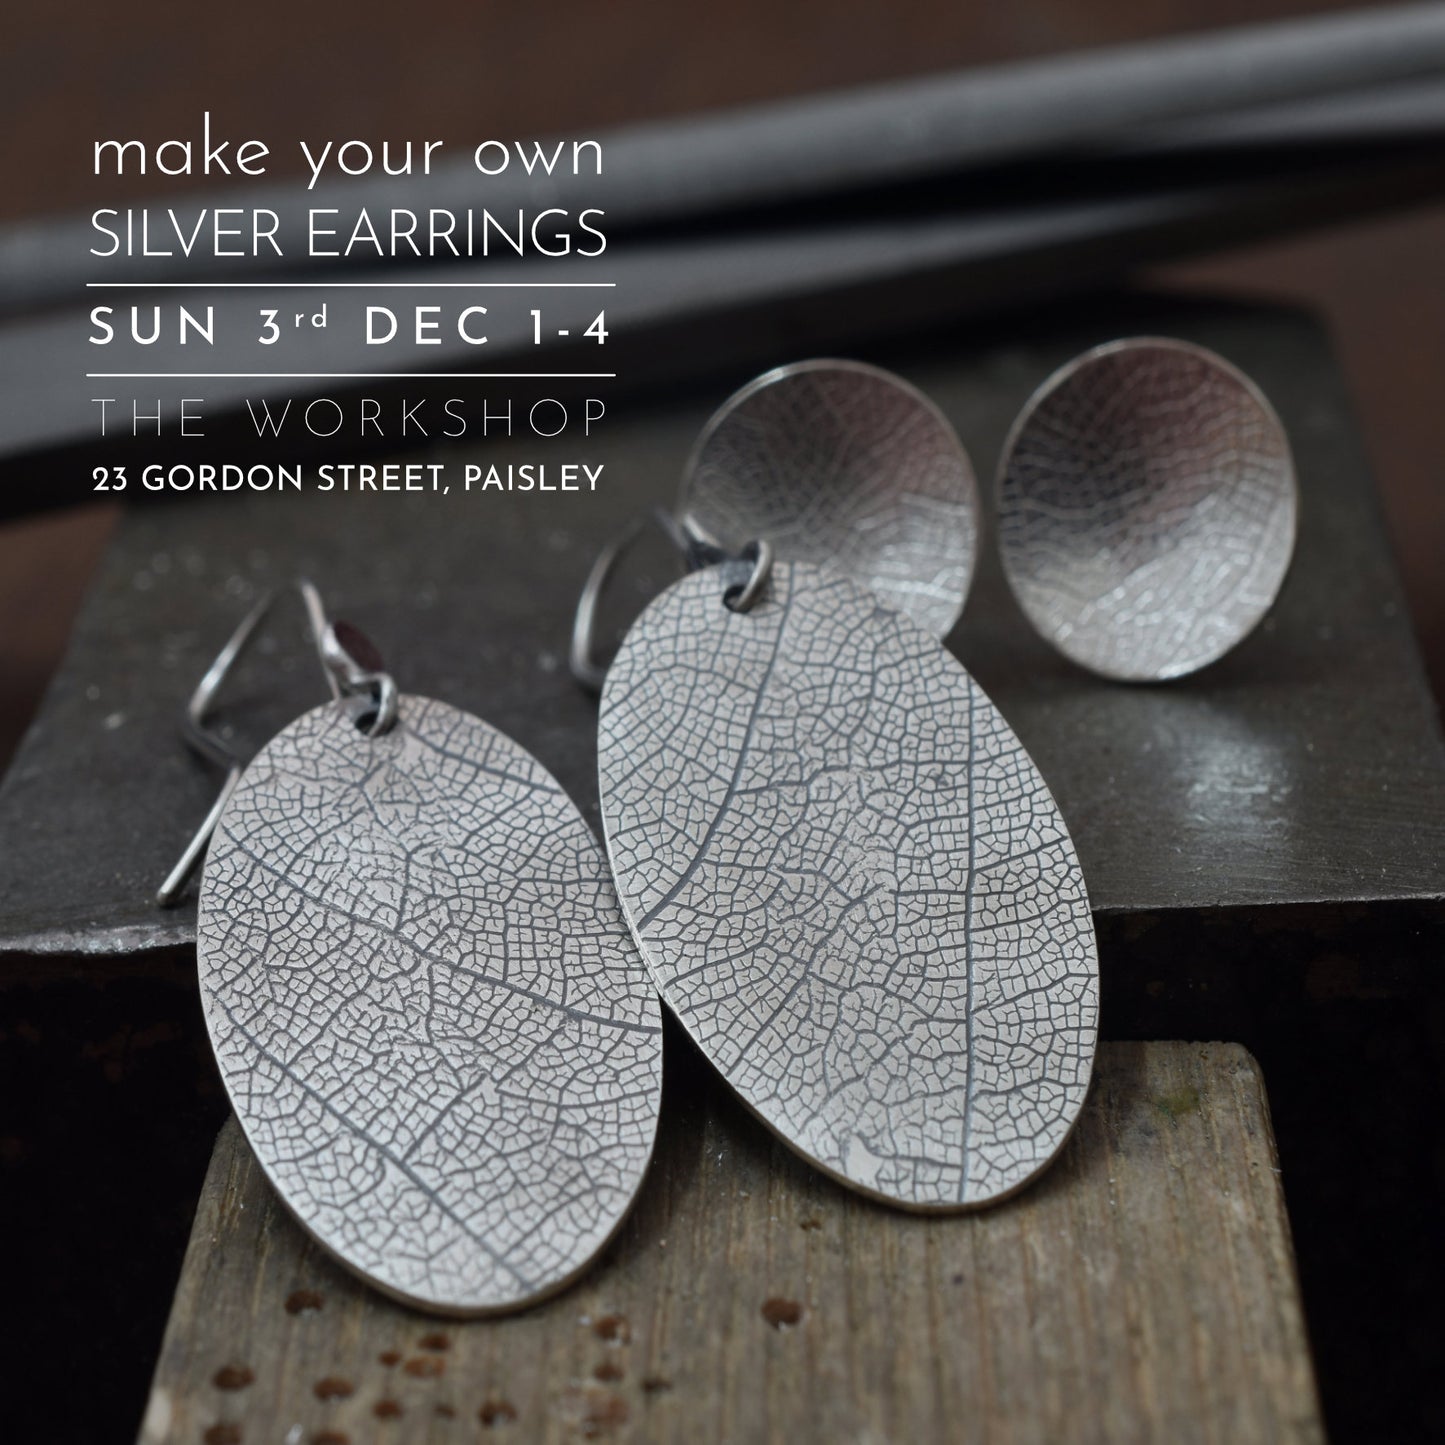 Textured Silver Earring Workshop - Paisley Pins